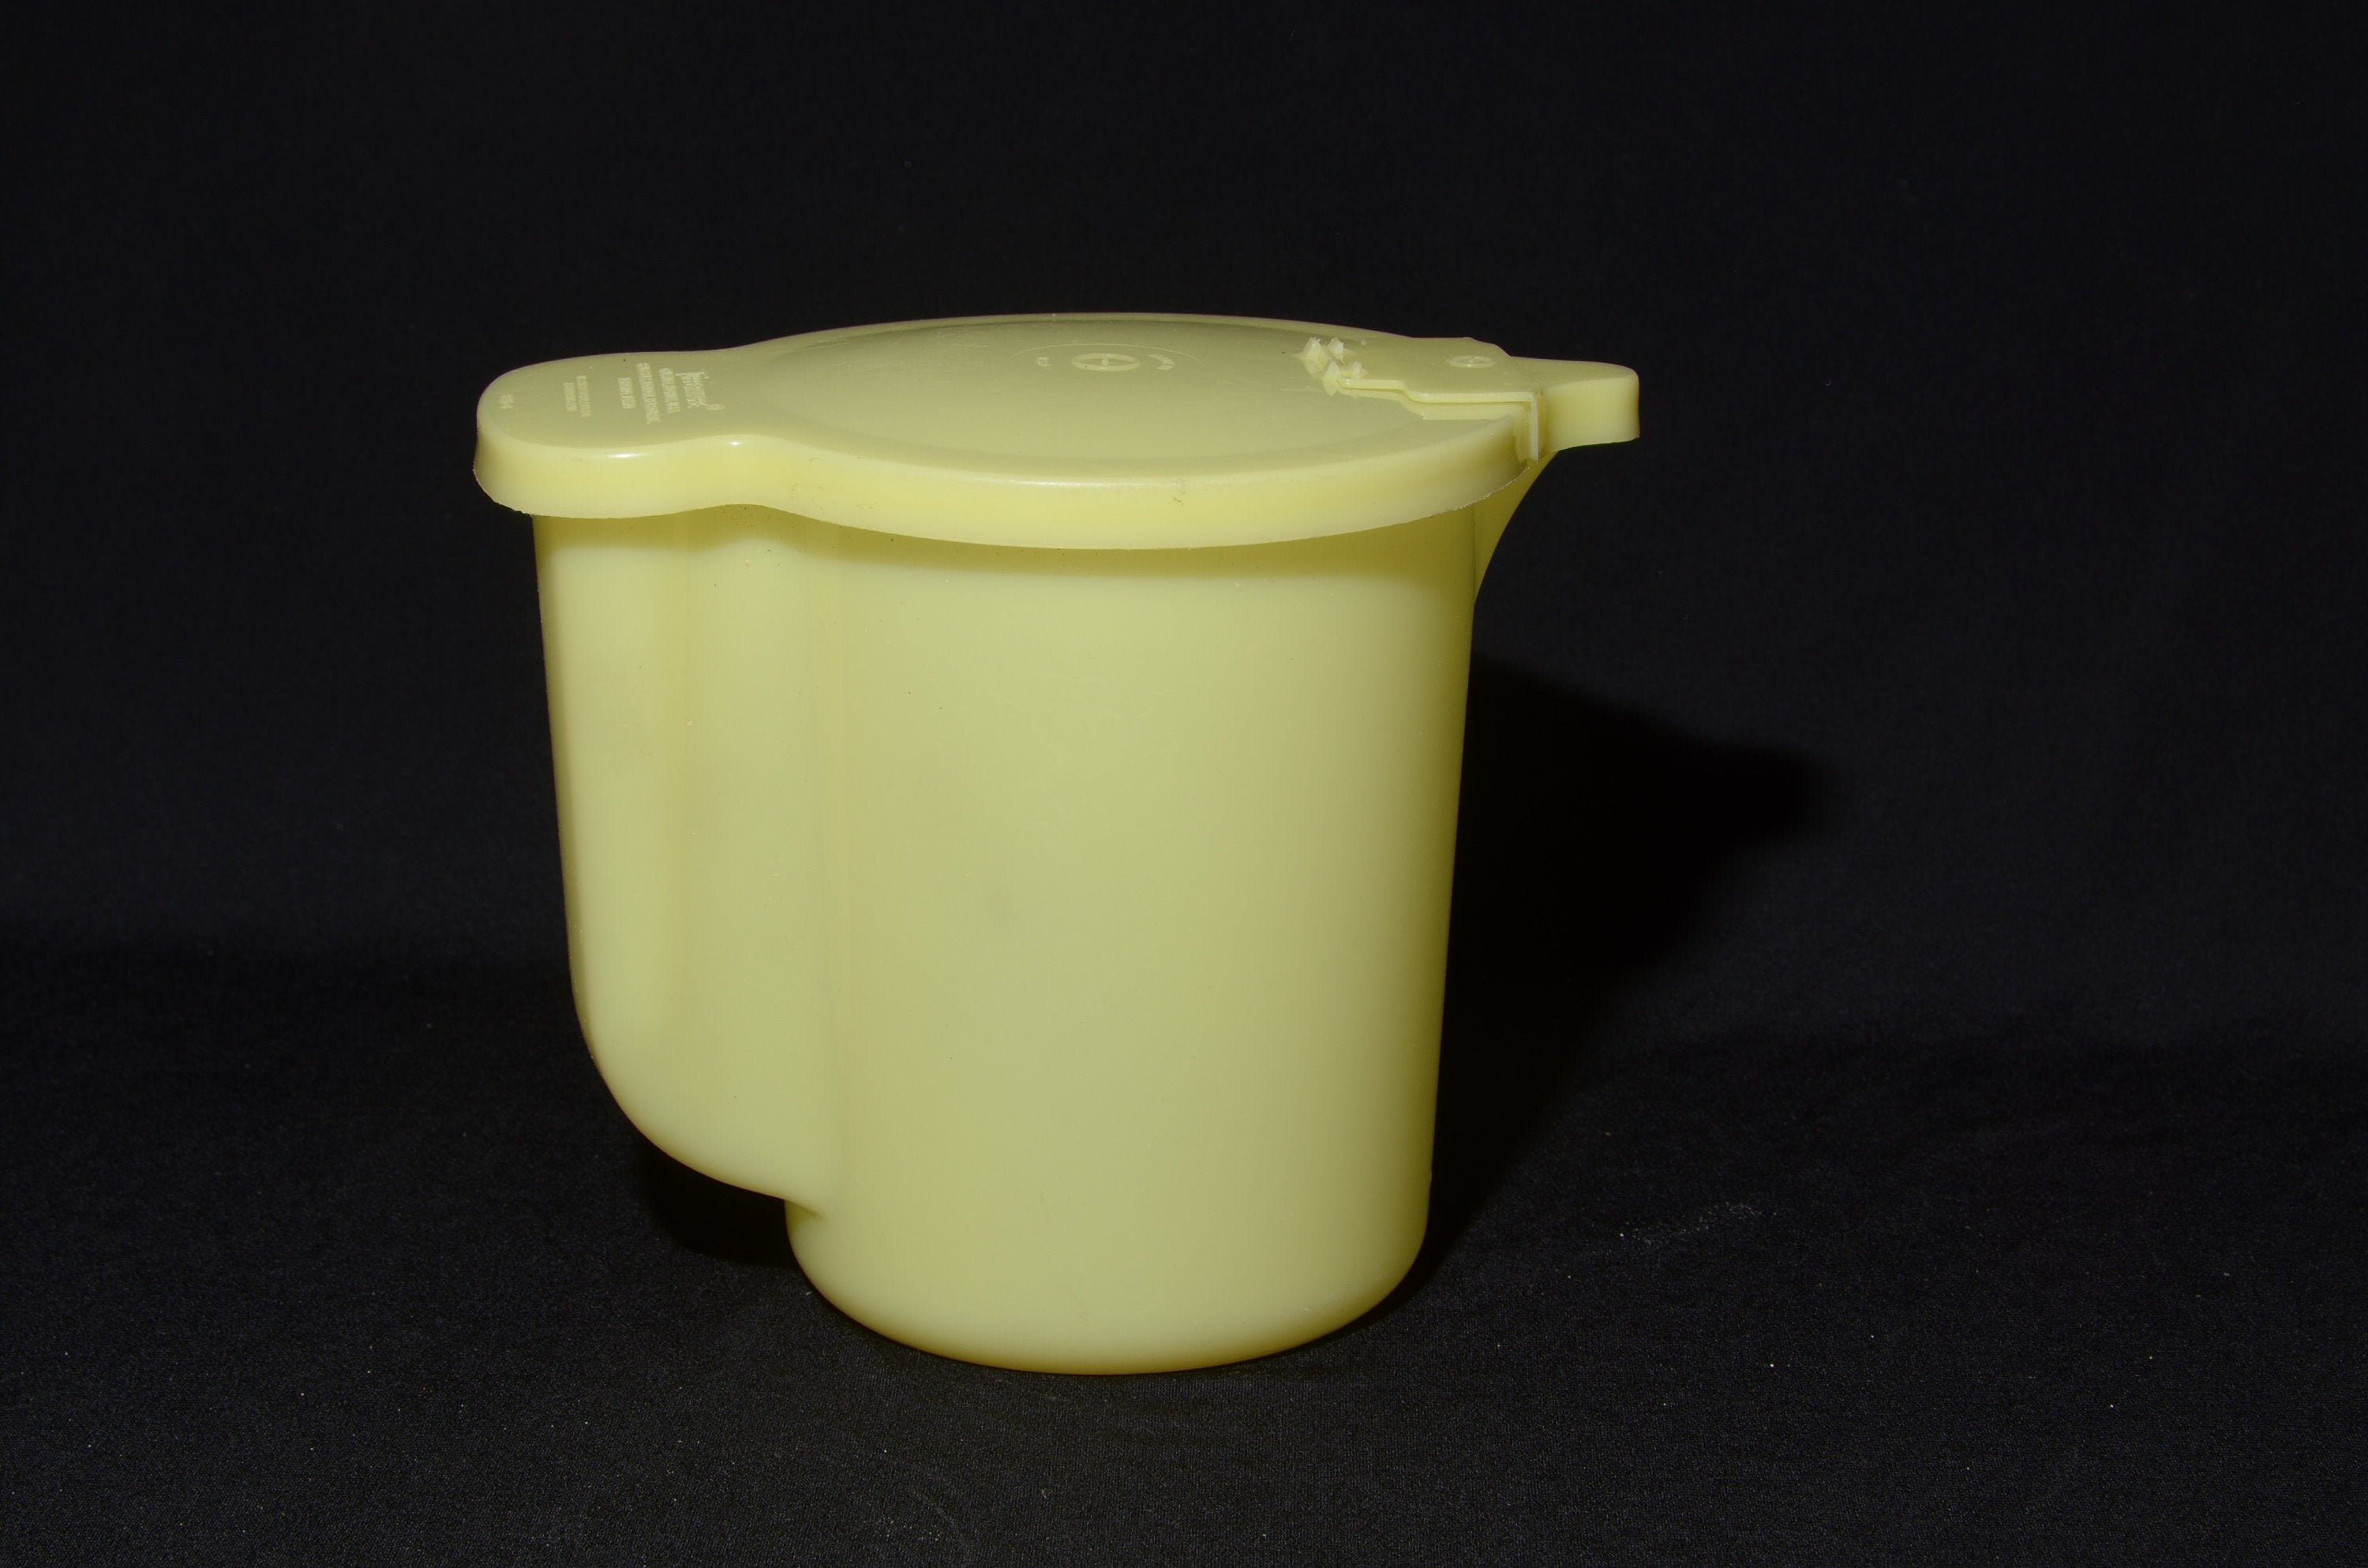 Tuppperware Canister, Plastic Pitchers, Corning